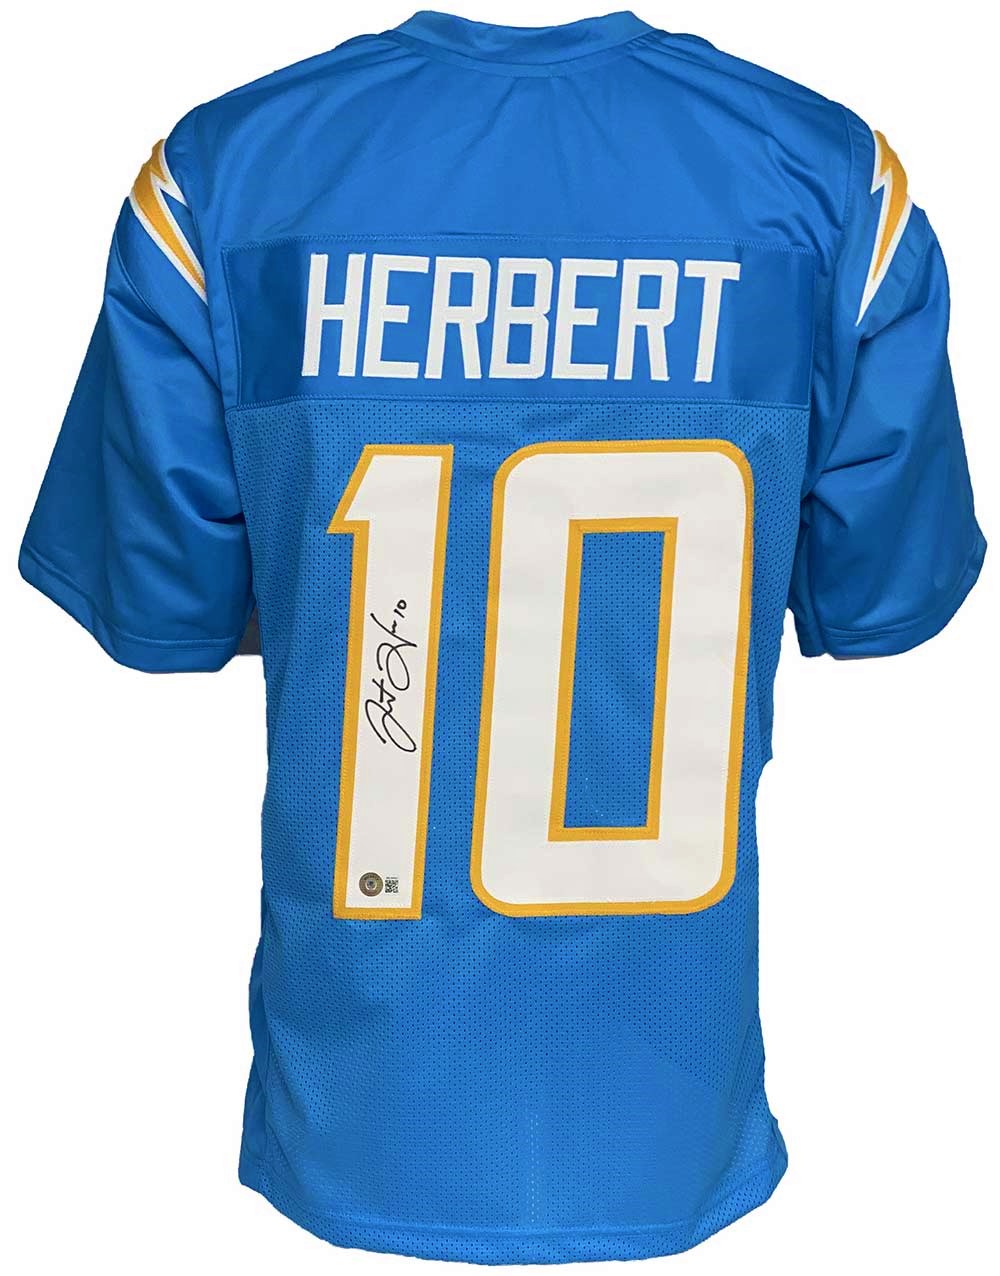  Chargers Justin Herbert Autographed Powder Blue Jersey